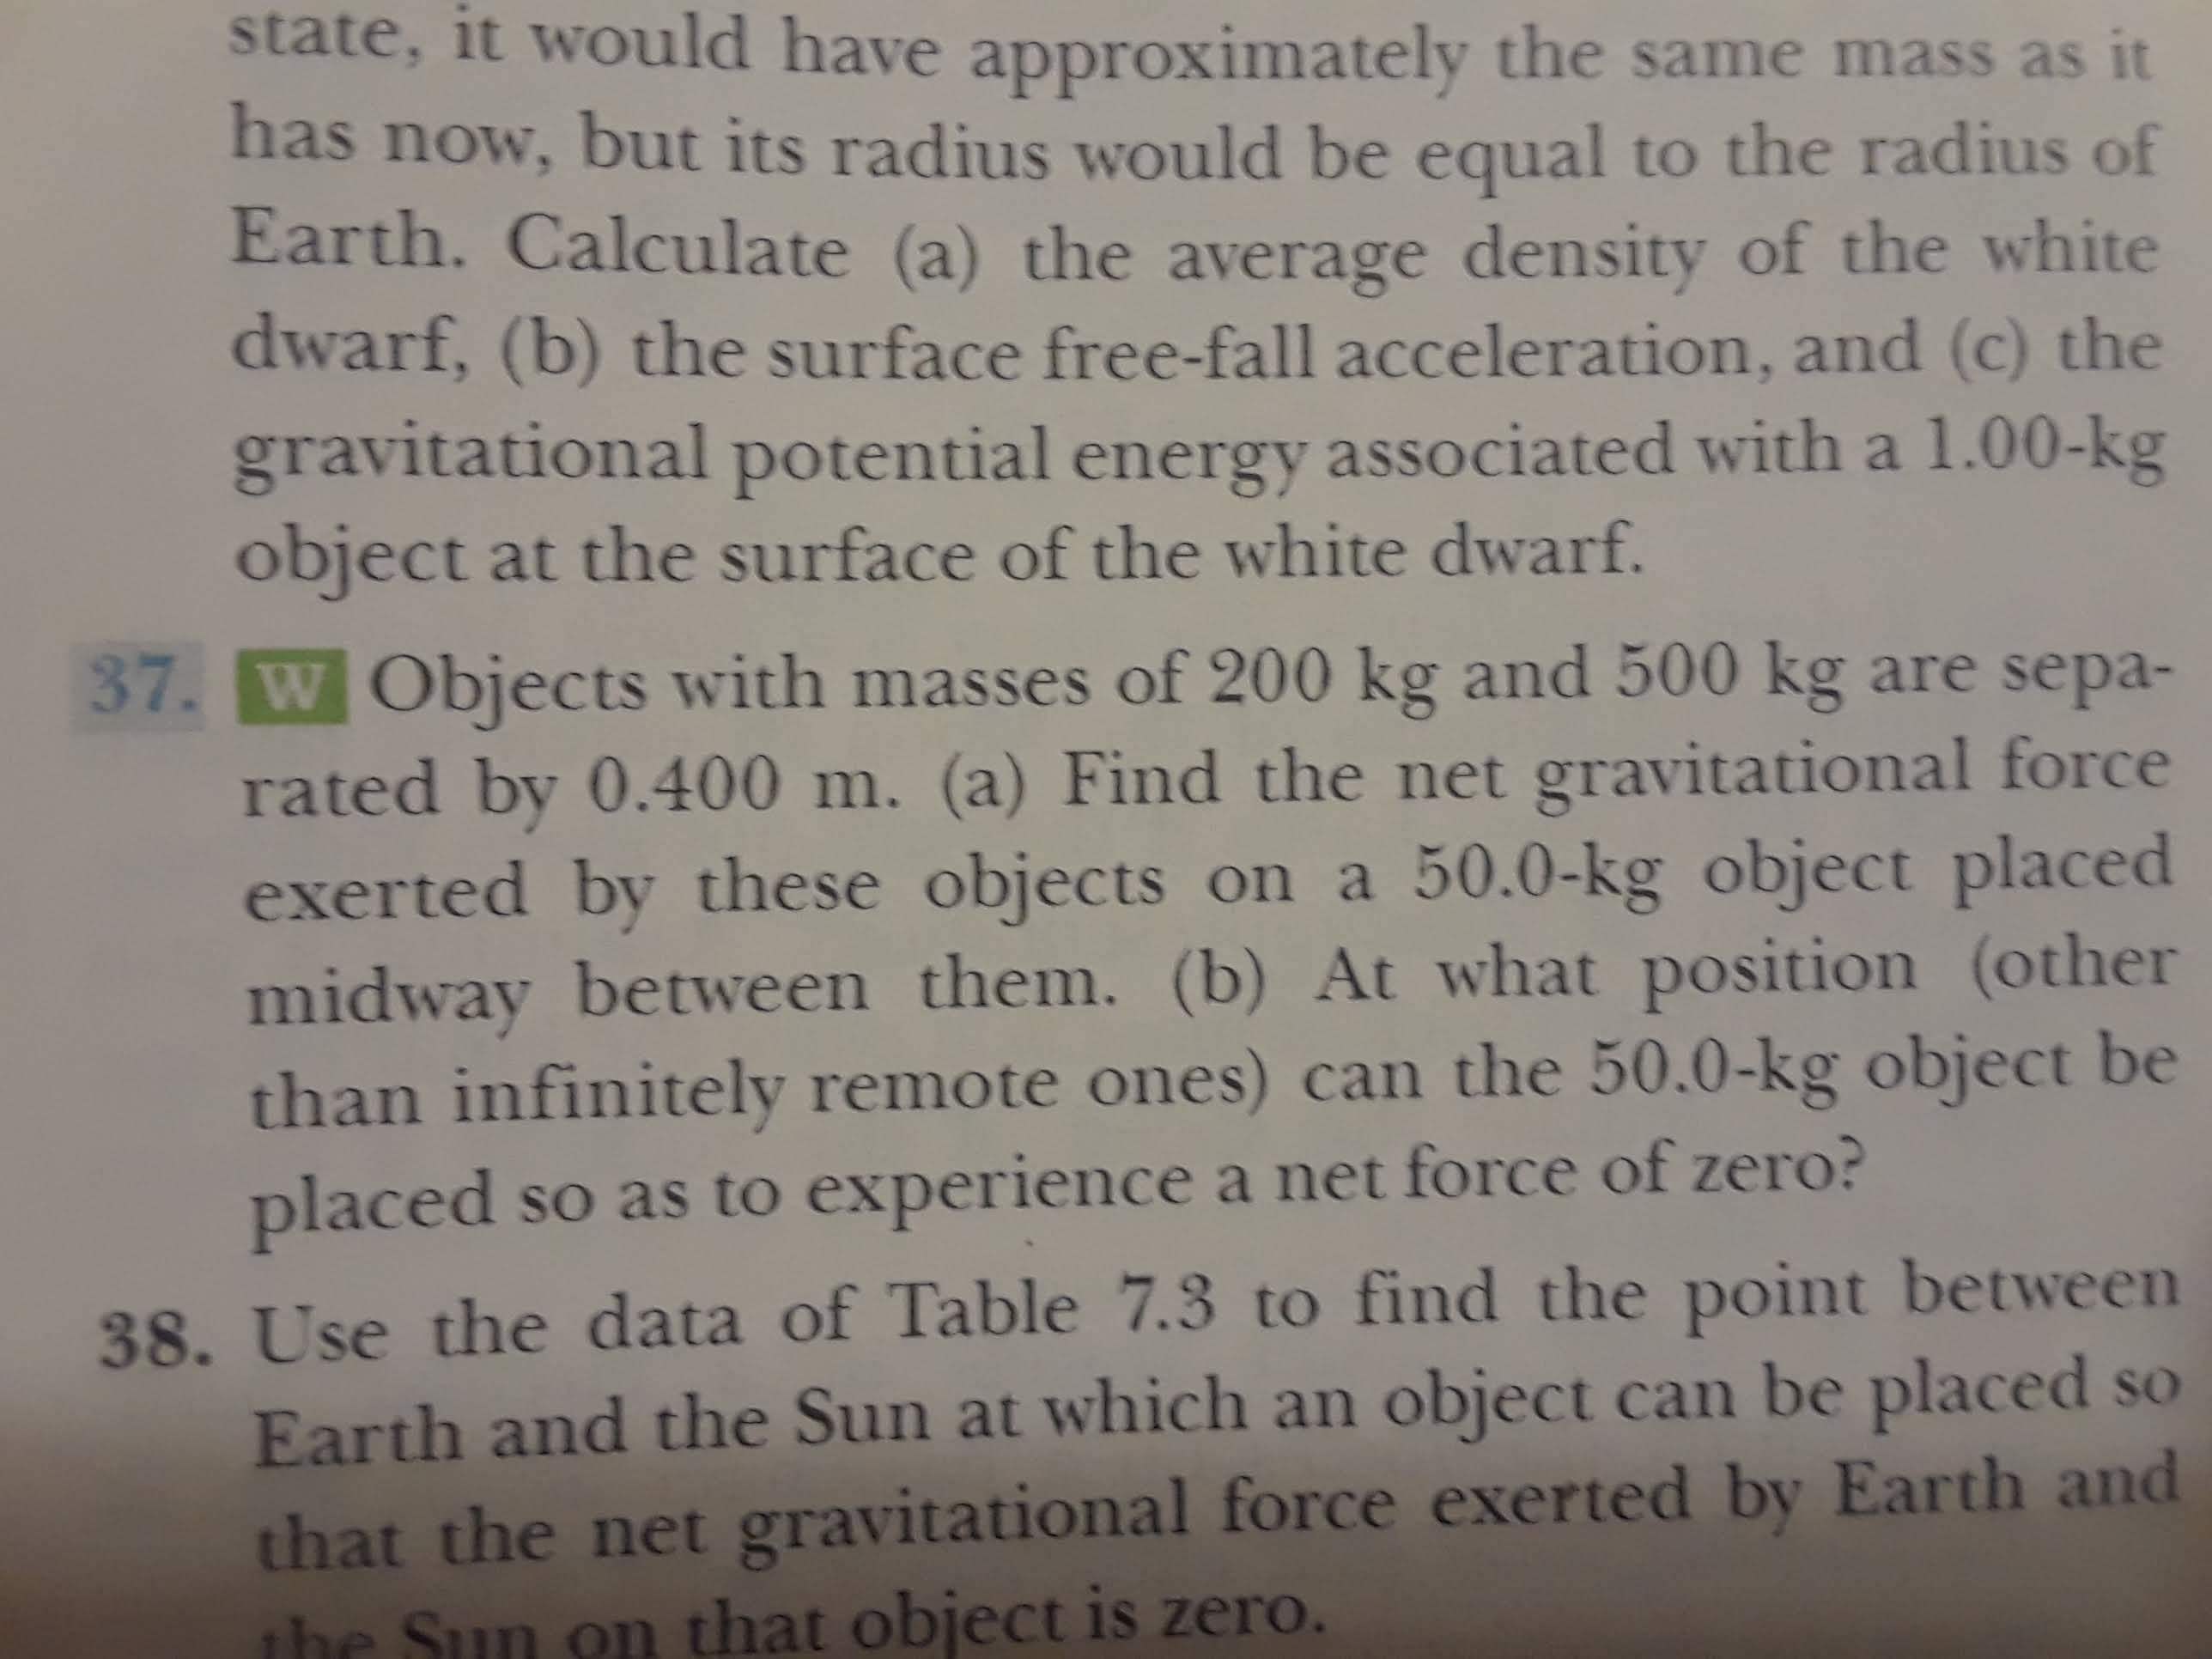 state, it would have apprOximately the same mass as it
has now, but its radius would be equal to the radius of
Earth. Calculate (a) the average density of the white
dwarf, (b) the surface free-fall acceleration, and (c) the
gravitational potential energy associated with a 1.00-kg
object at the surface of the white dwarf.
37. W Objects with masses of 200 kg and 500 kg are sepa-
rated by 0.400 m. (a) Find the net gravitational force
exerted by the se objects on a 50.0-kg object placed
midway between them. (b) At what position (other
than infinitely remote ones) can the 50.0-kg object be
placed so as to experience a net force of zero?
38. Use the data of Table 7.3 to find the point between
Earth and the Sun at which an object can be placed so
that the net gravitational force exerted by Earth and
the Sun on that object is zero.
